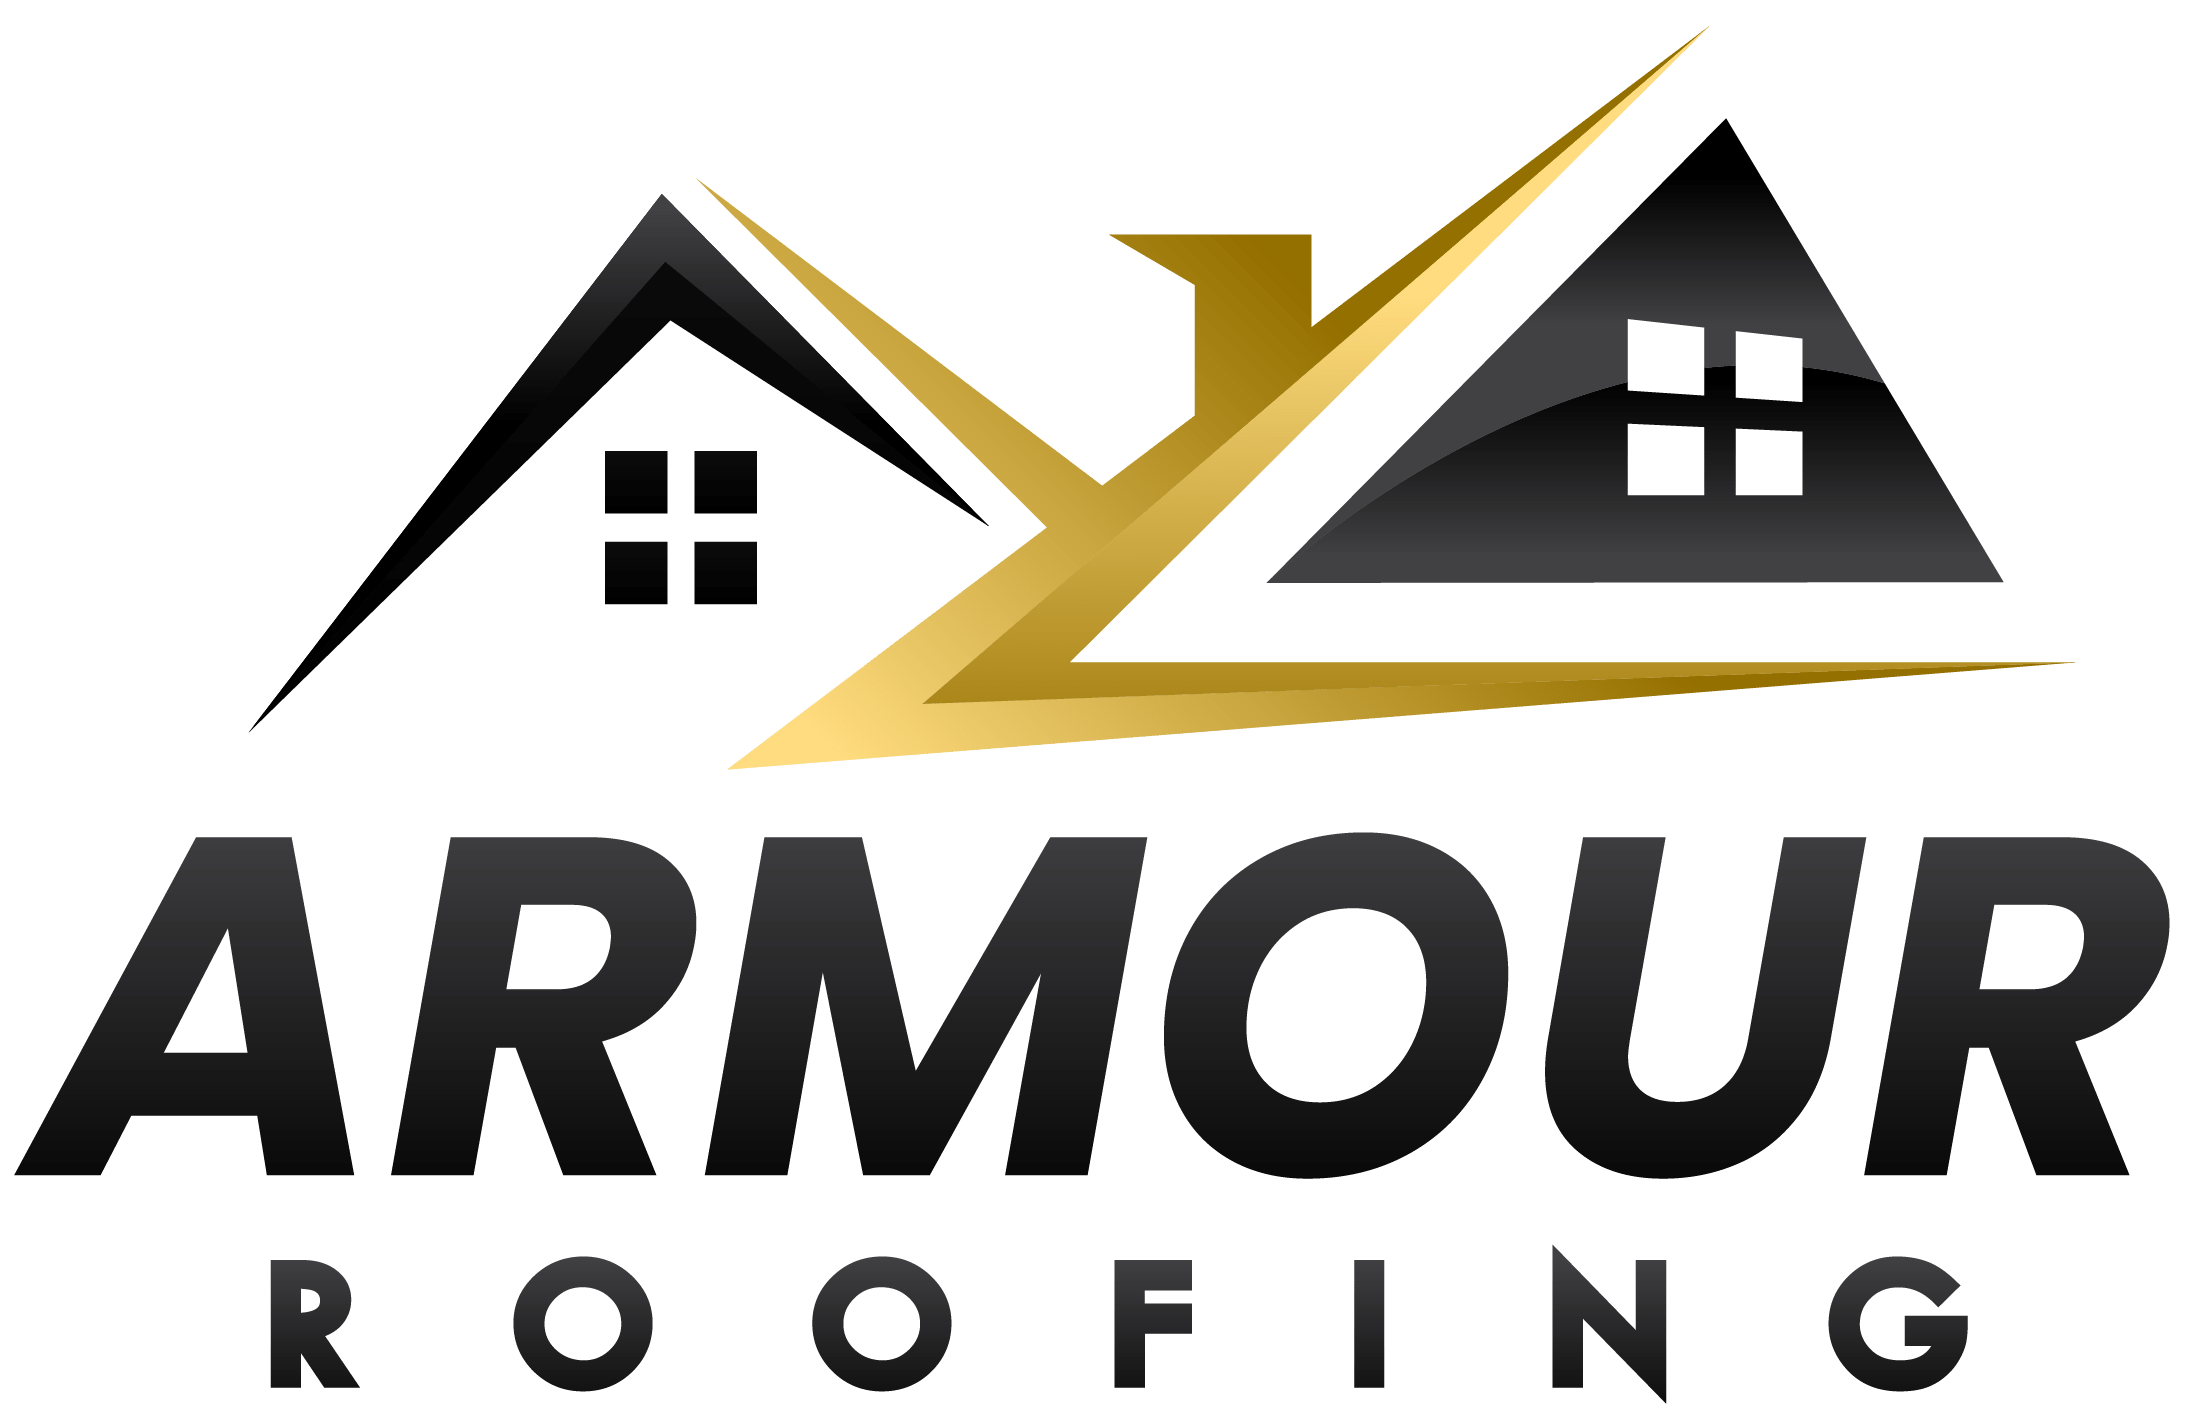 Armour Roofing roofing company in South Carolina